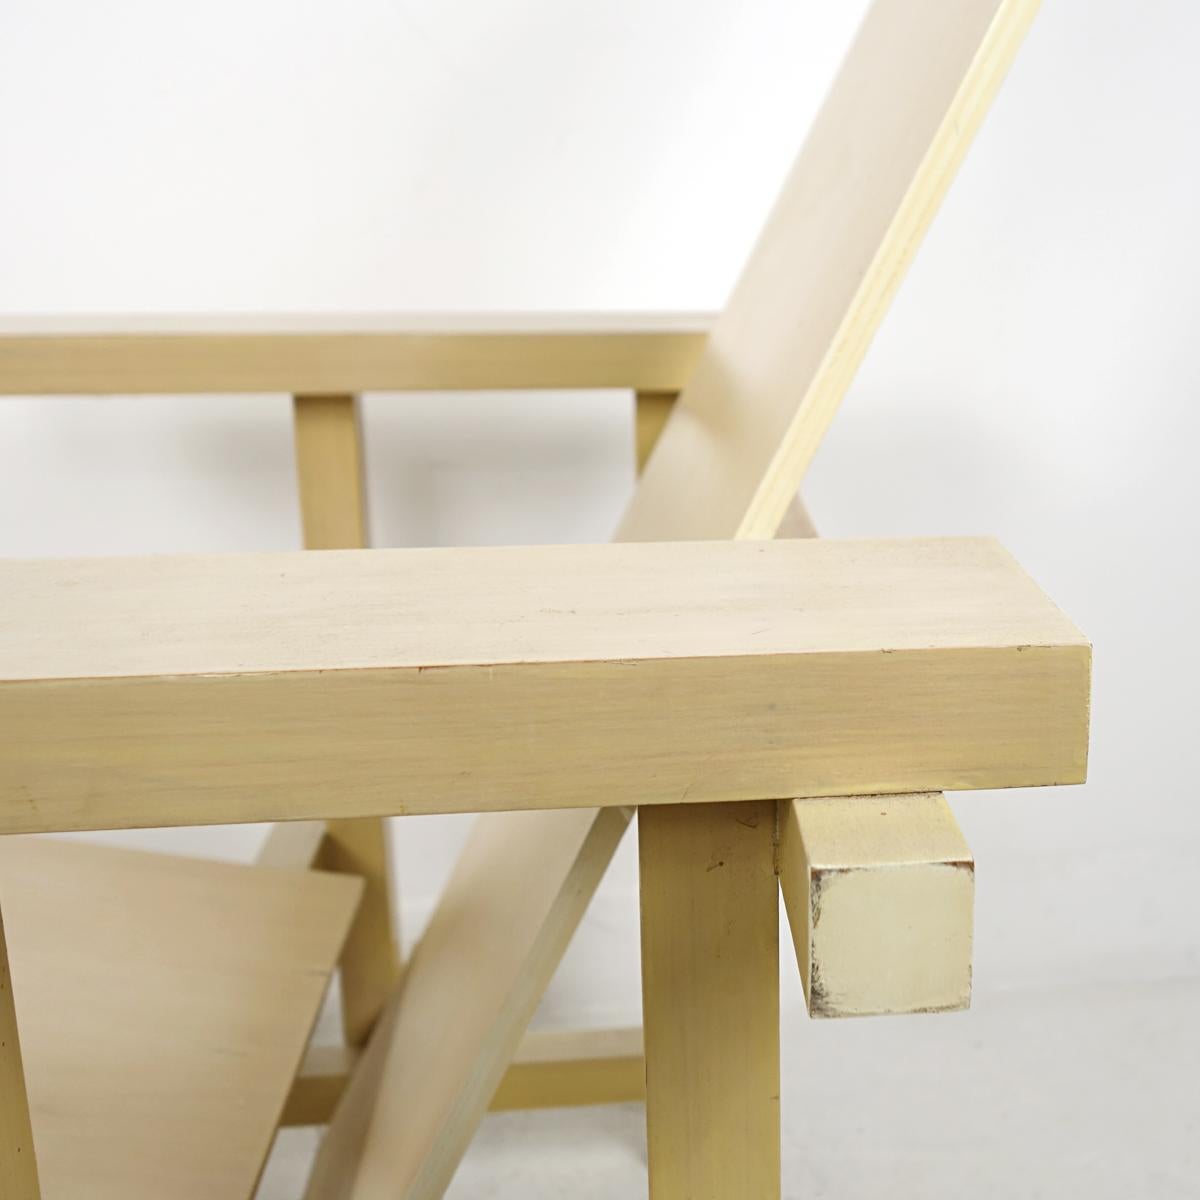 Modernist Chair Made of Uncolored Lacquered Wood after Gerrit Rietveld's Design 7